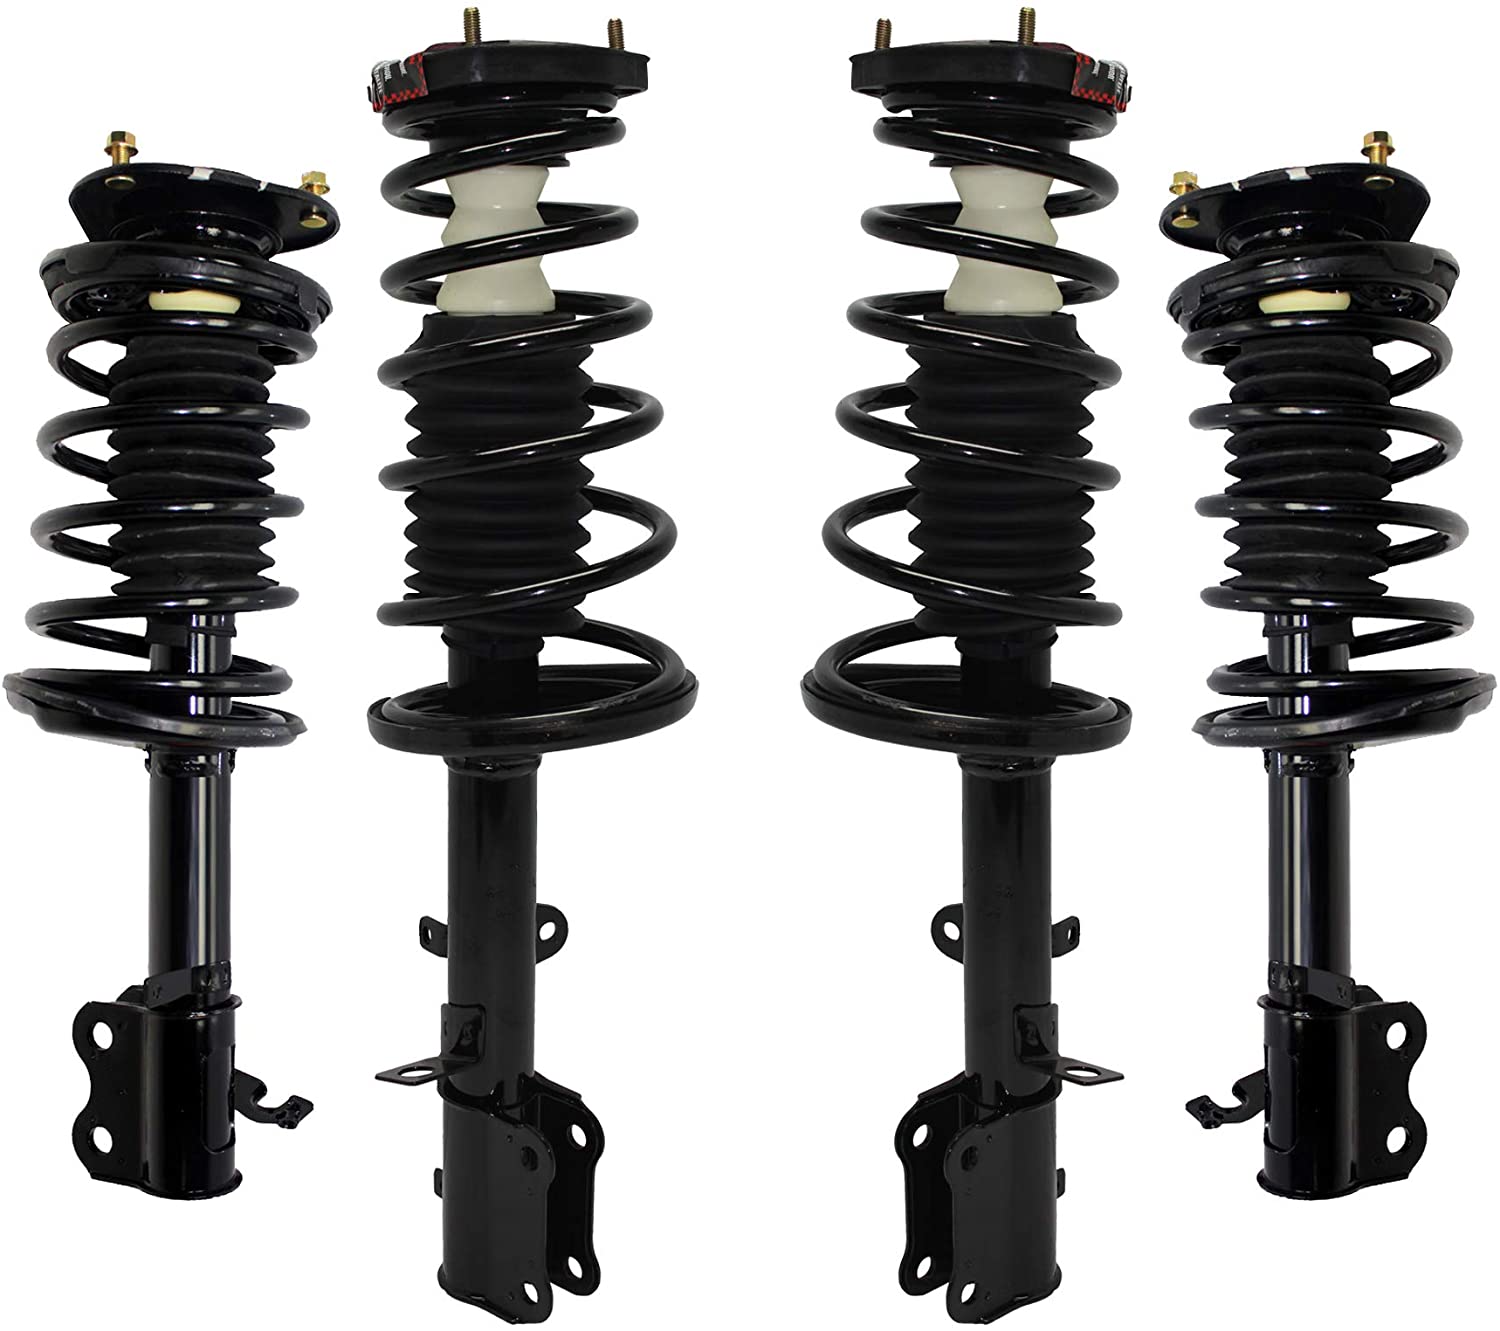 Detroit Axle - 4PC Complete Front and Rear Strut & Coil Spring Assembly for 1998 1999 2000 2001 2002 Chevy Prizm - [1993-97 GEO Prizm] - 1993-2002 Toyota Corolla